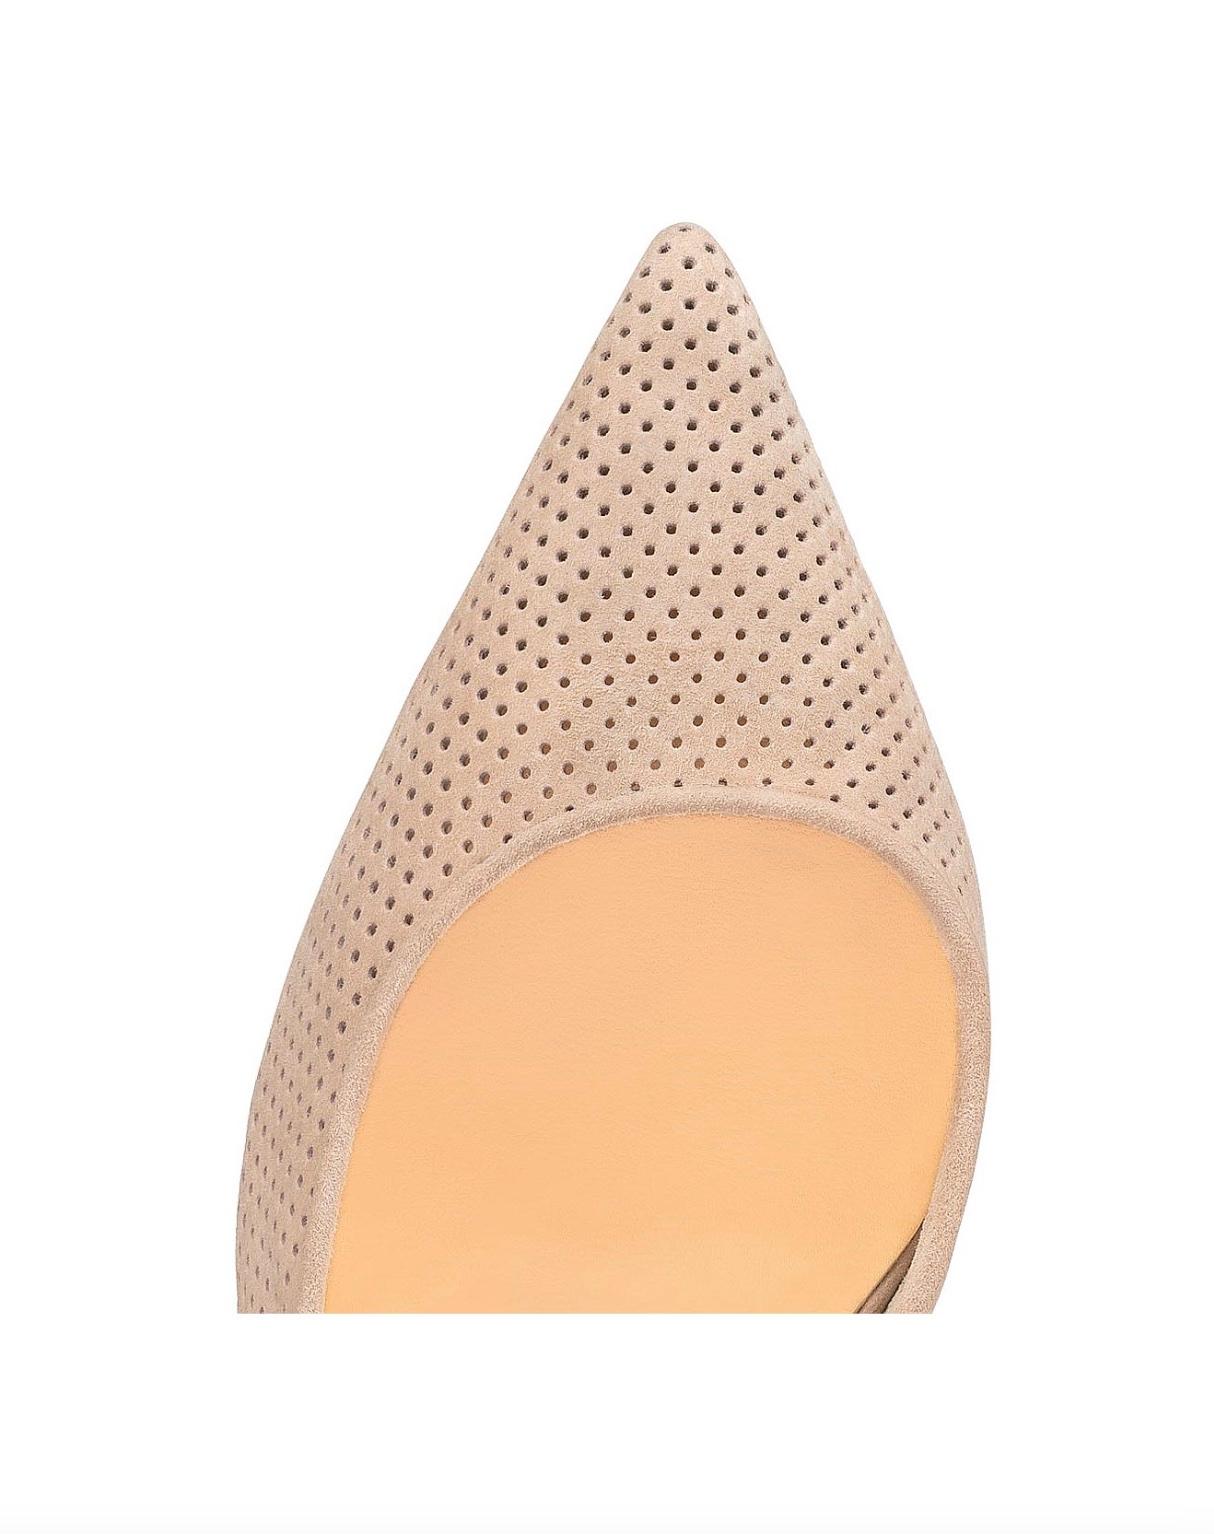 A tribute to Victoria Beckham, the Victorilla pump features seductive slender lines. This Maison Christian Louboutin shoe is set on a 100 mm heel and features Nougat beige perforated calfskin suede. It has a pointed toe and two straps that